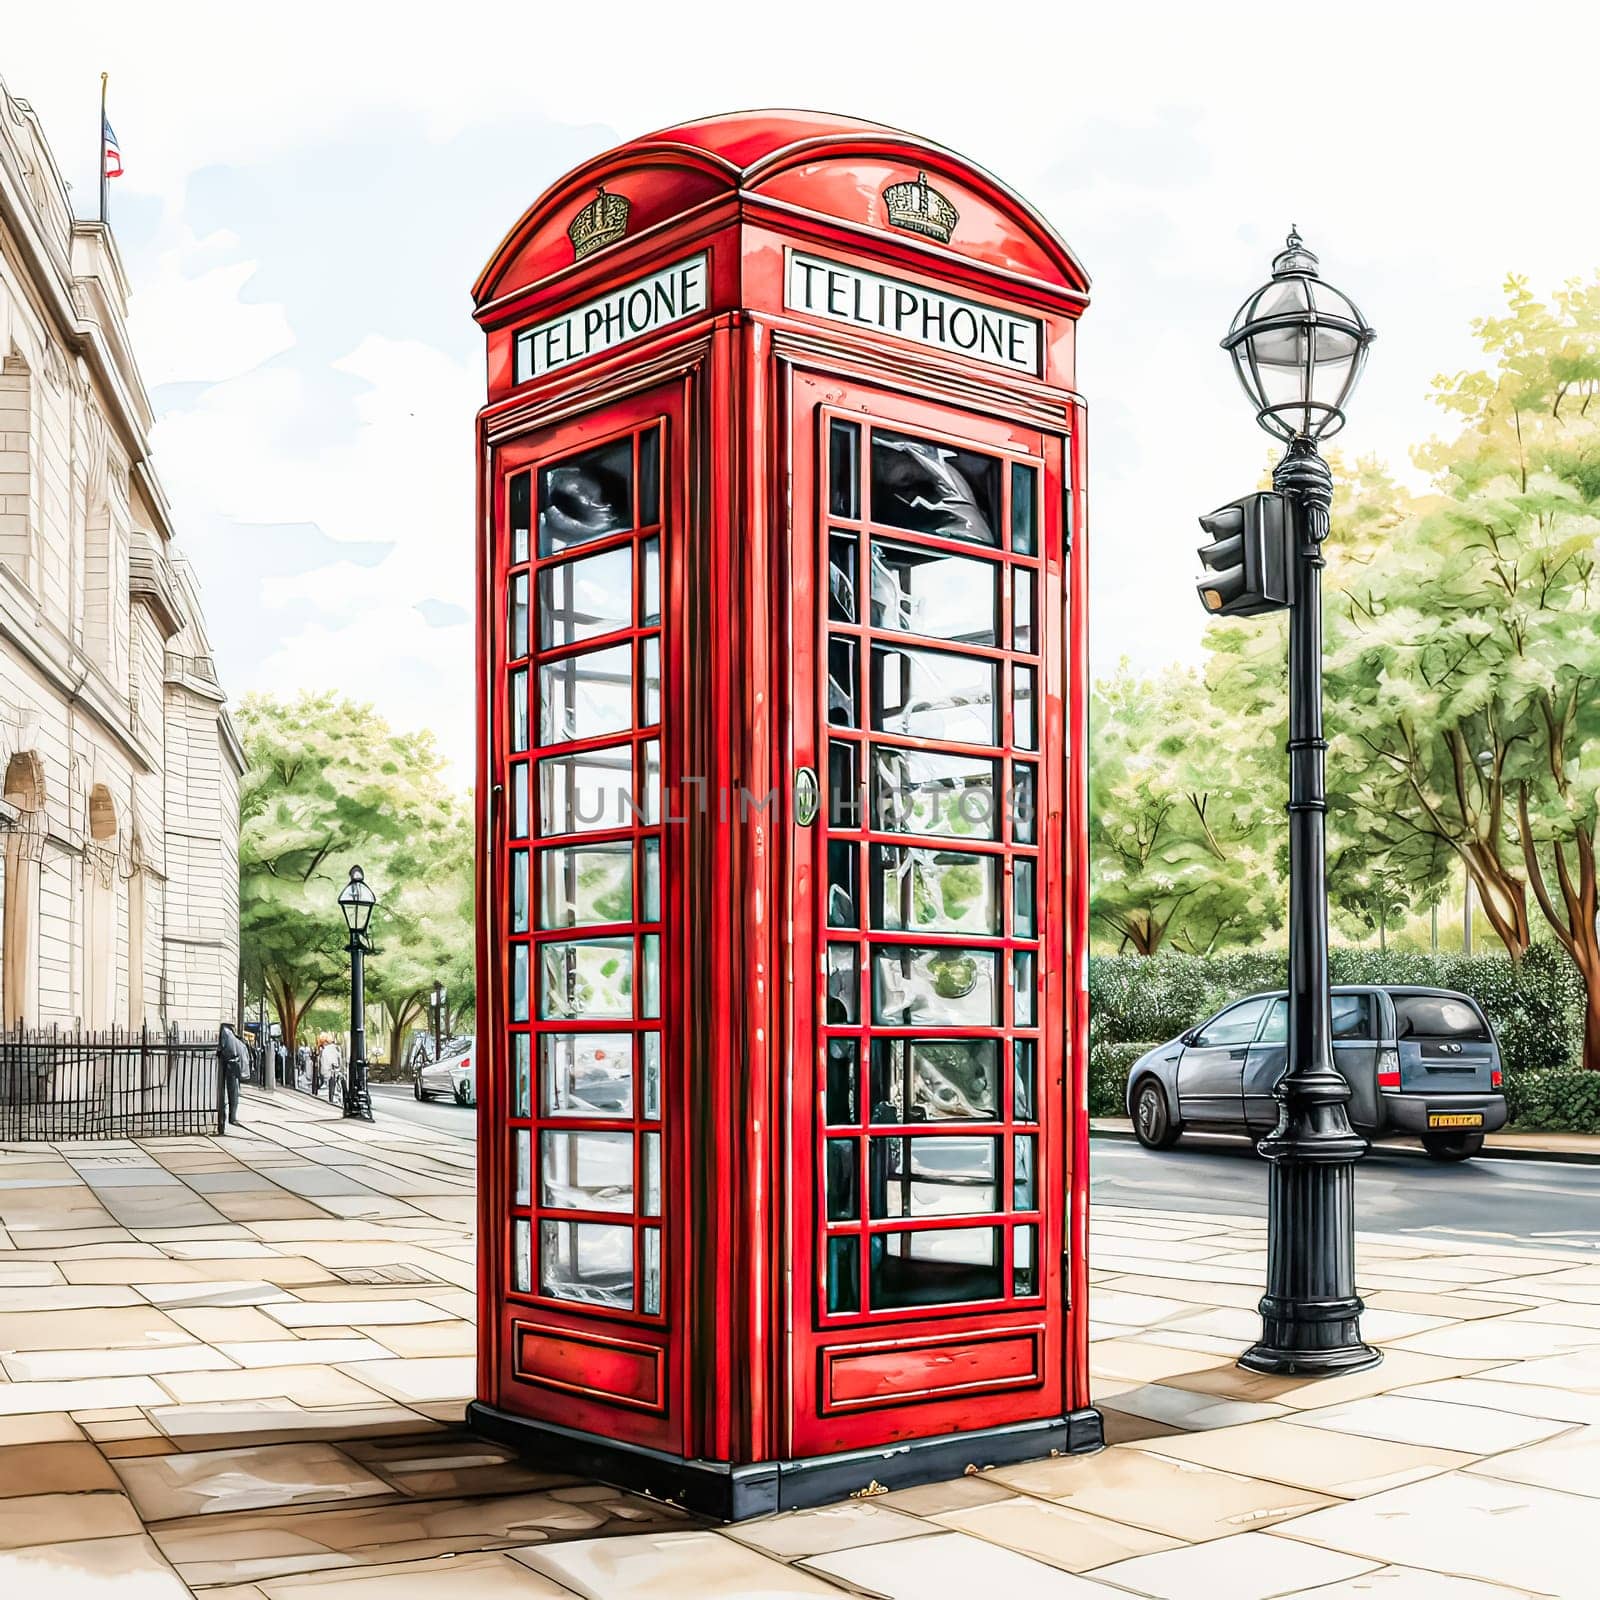 London Calling, Watercolor artwork featuring a red telephone booth in a picturesque urban street setting